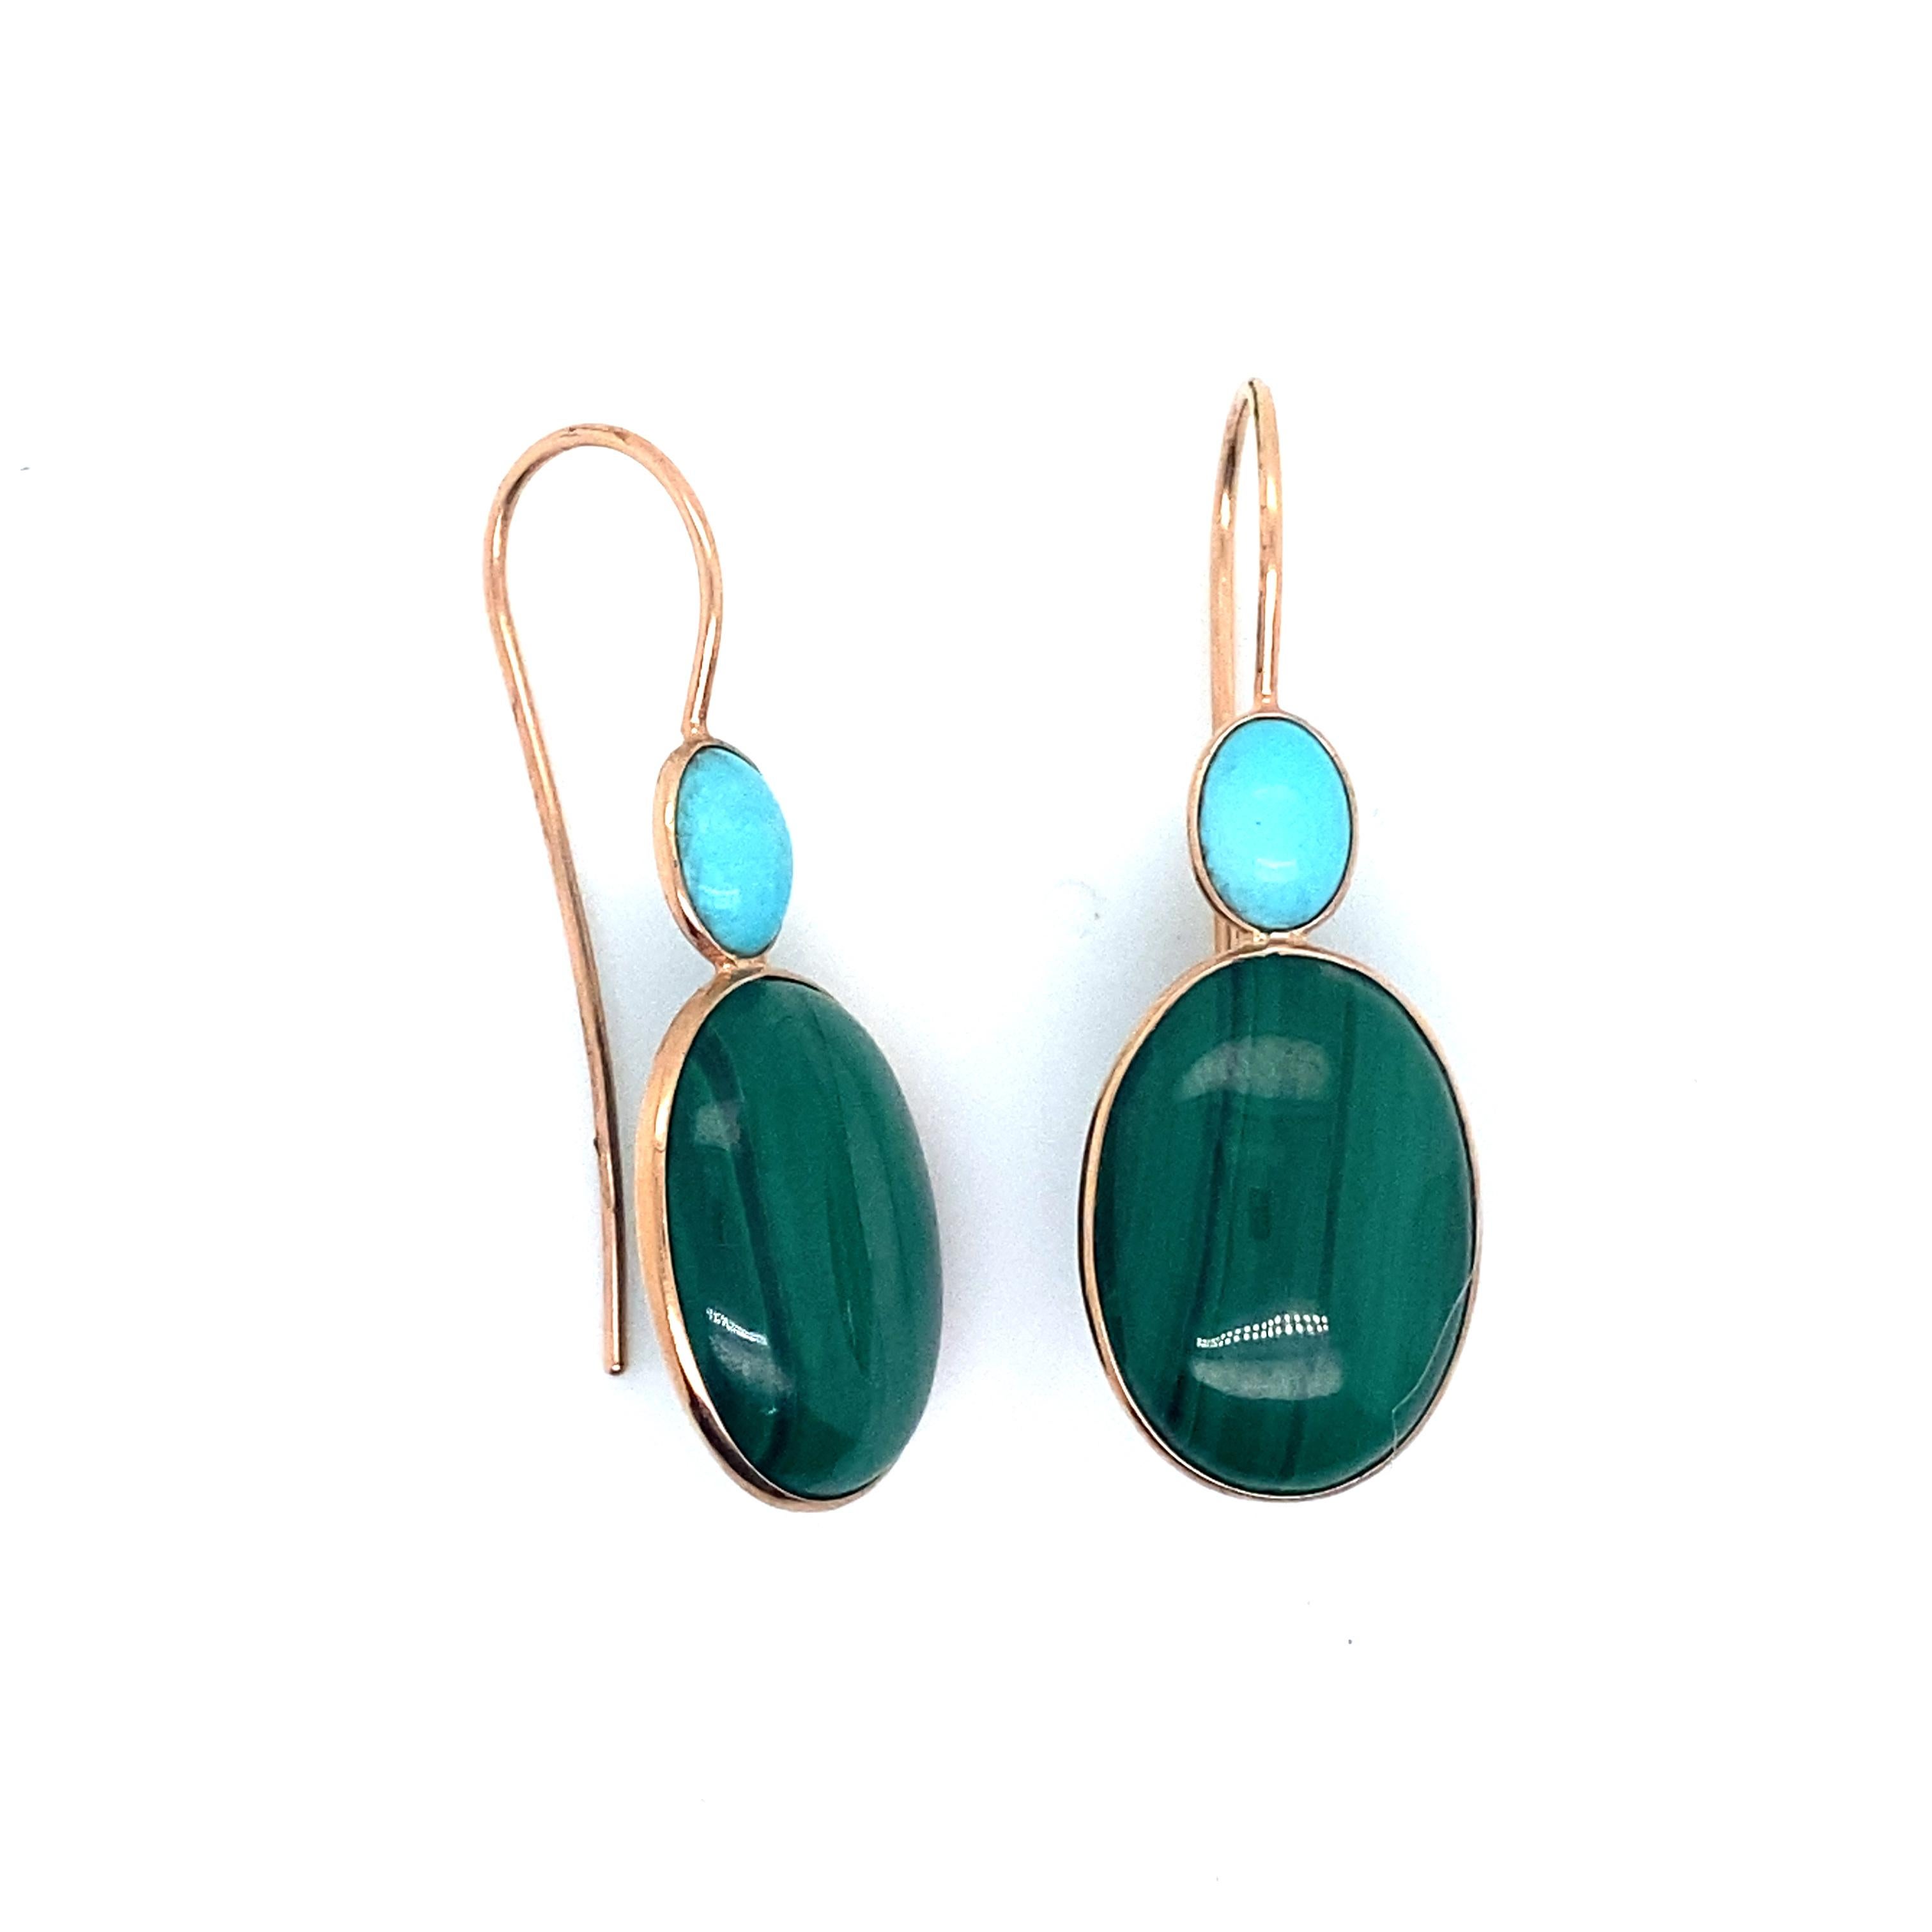 18 Karats Yellow Gold Malakites Earings with Turquoises.
The stones are cut in the shape of cabochon and reflect the light. The turquoise is natural and the yellow gold is brushed. The whole is very light.
Discreet, they match with other jewellery,